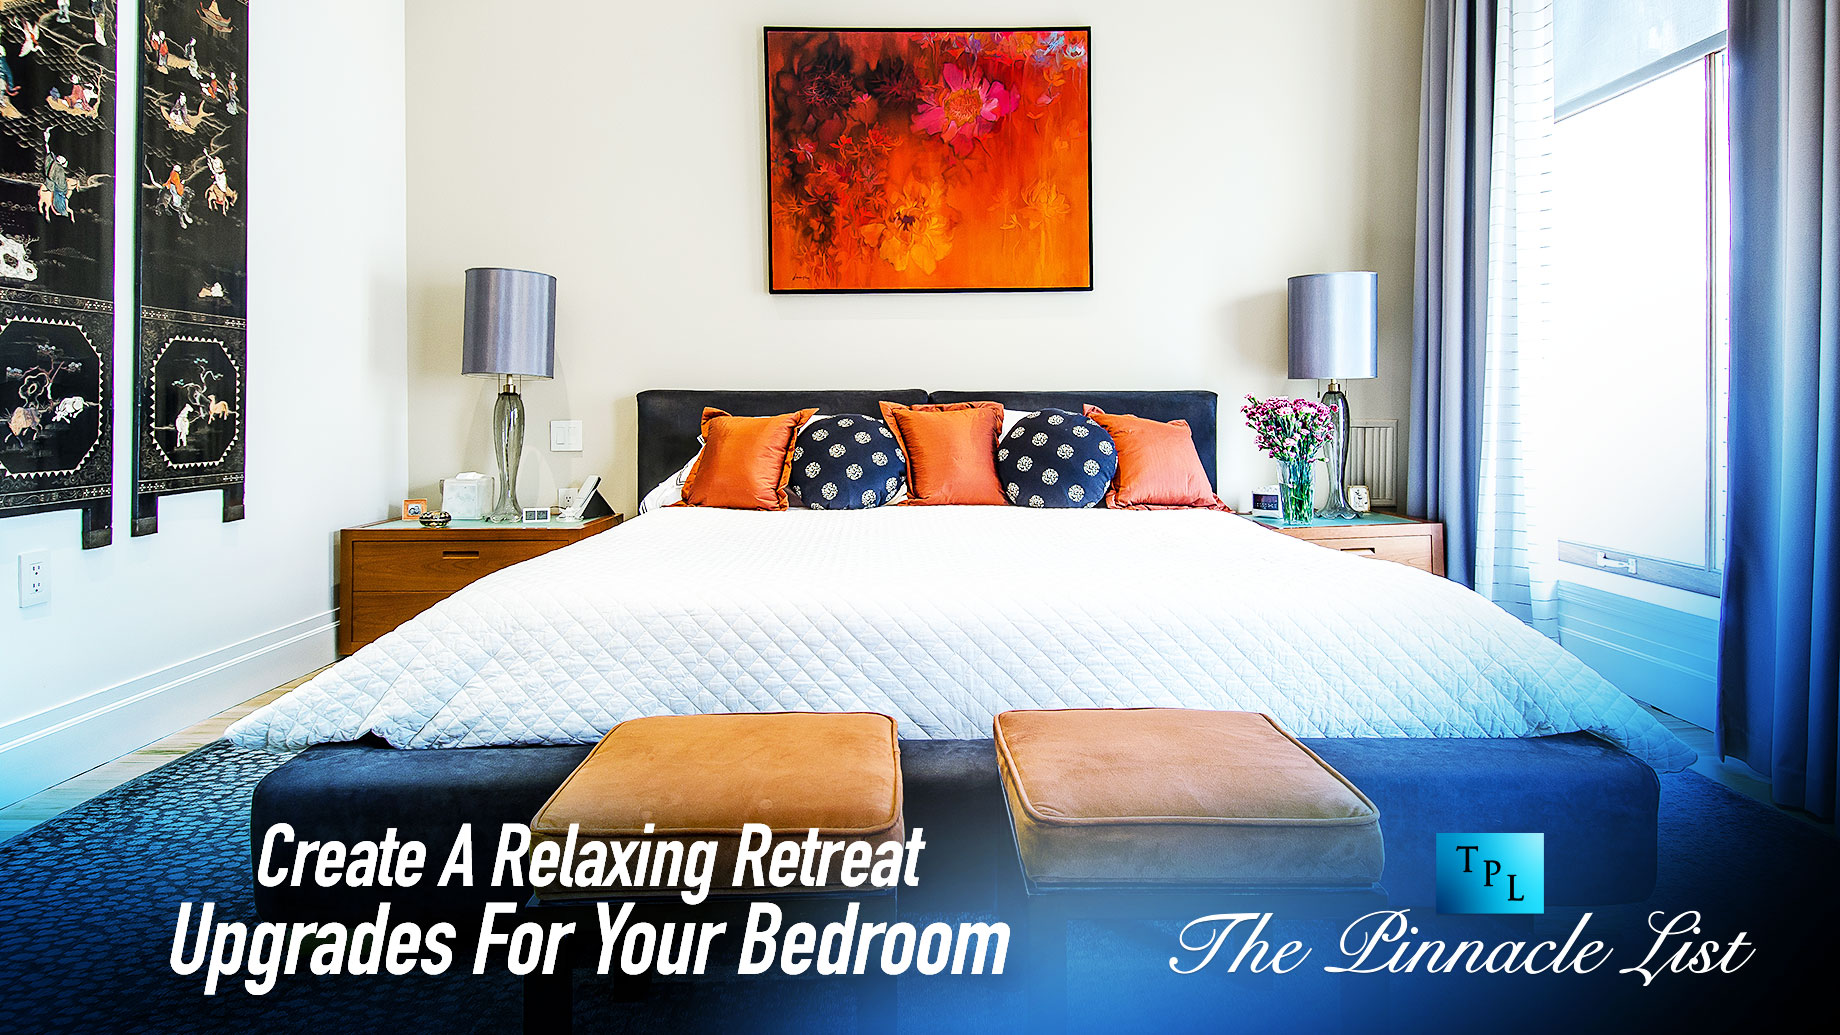 Create A Relaxing Retreat: Upgrades For Your Bedroom